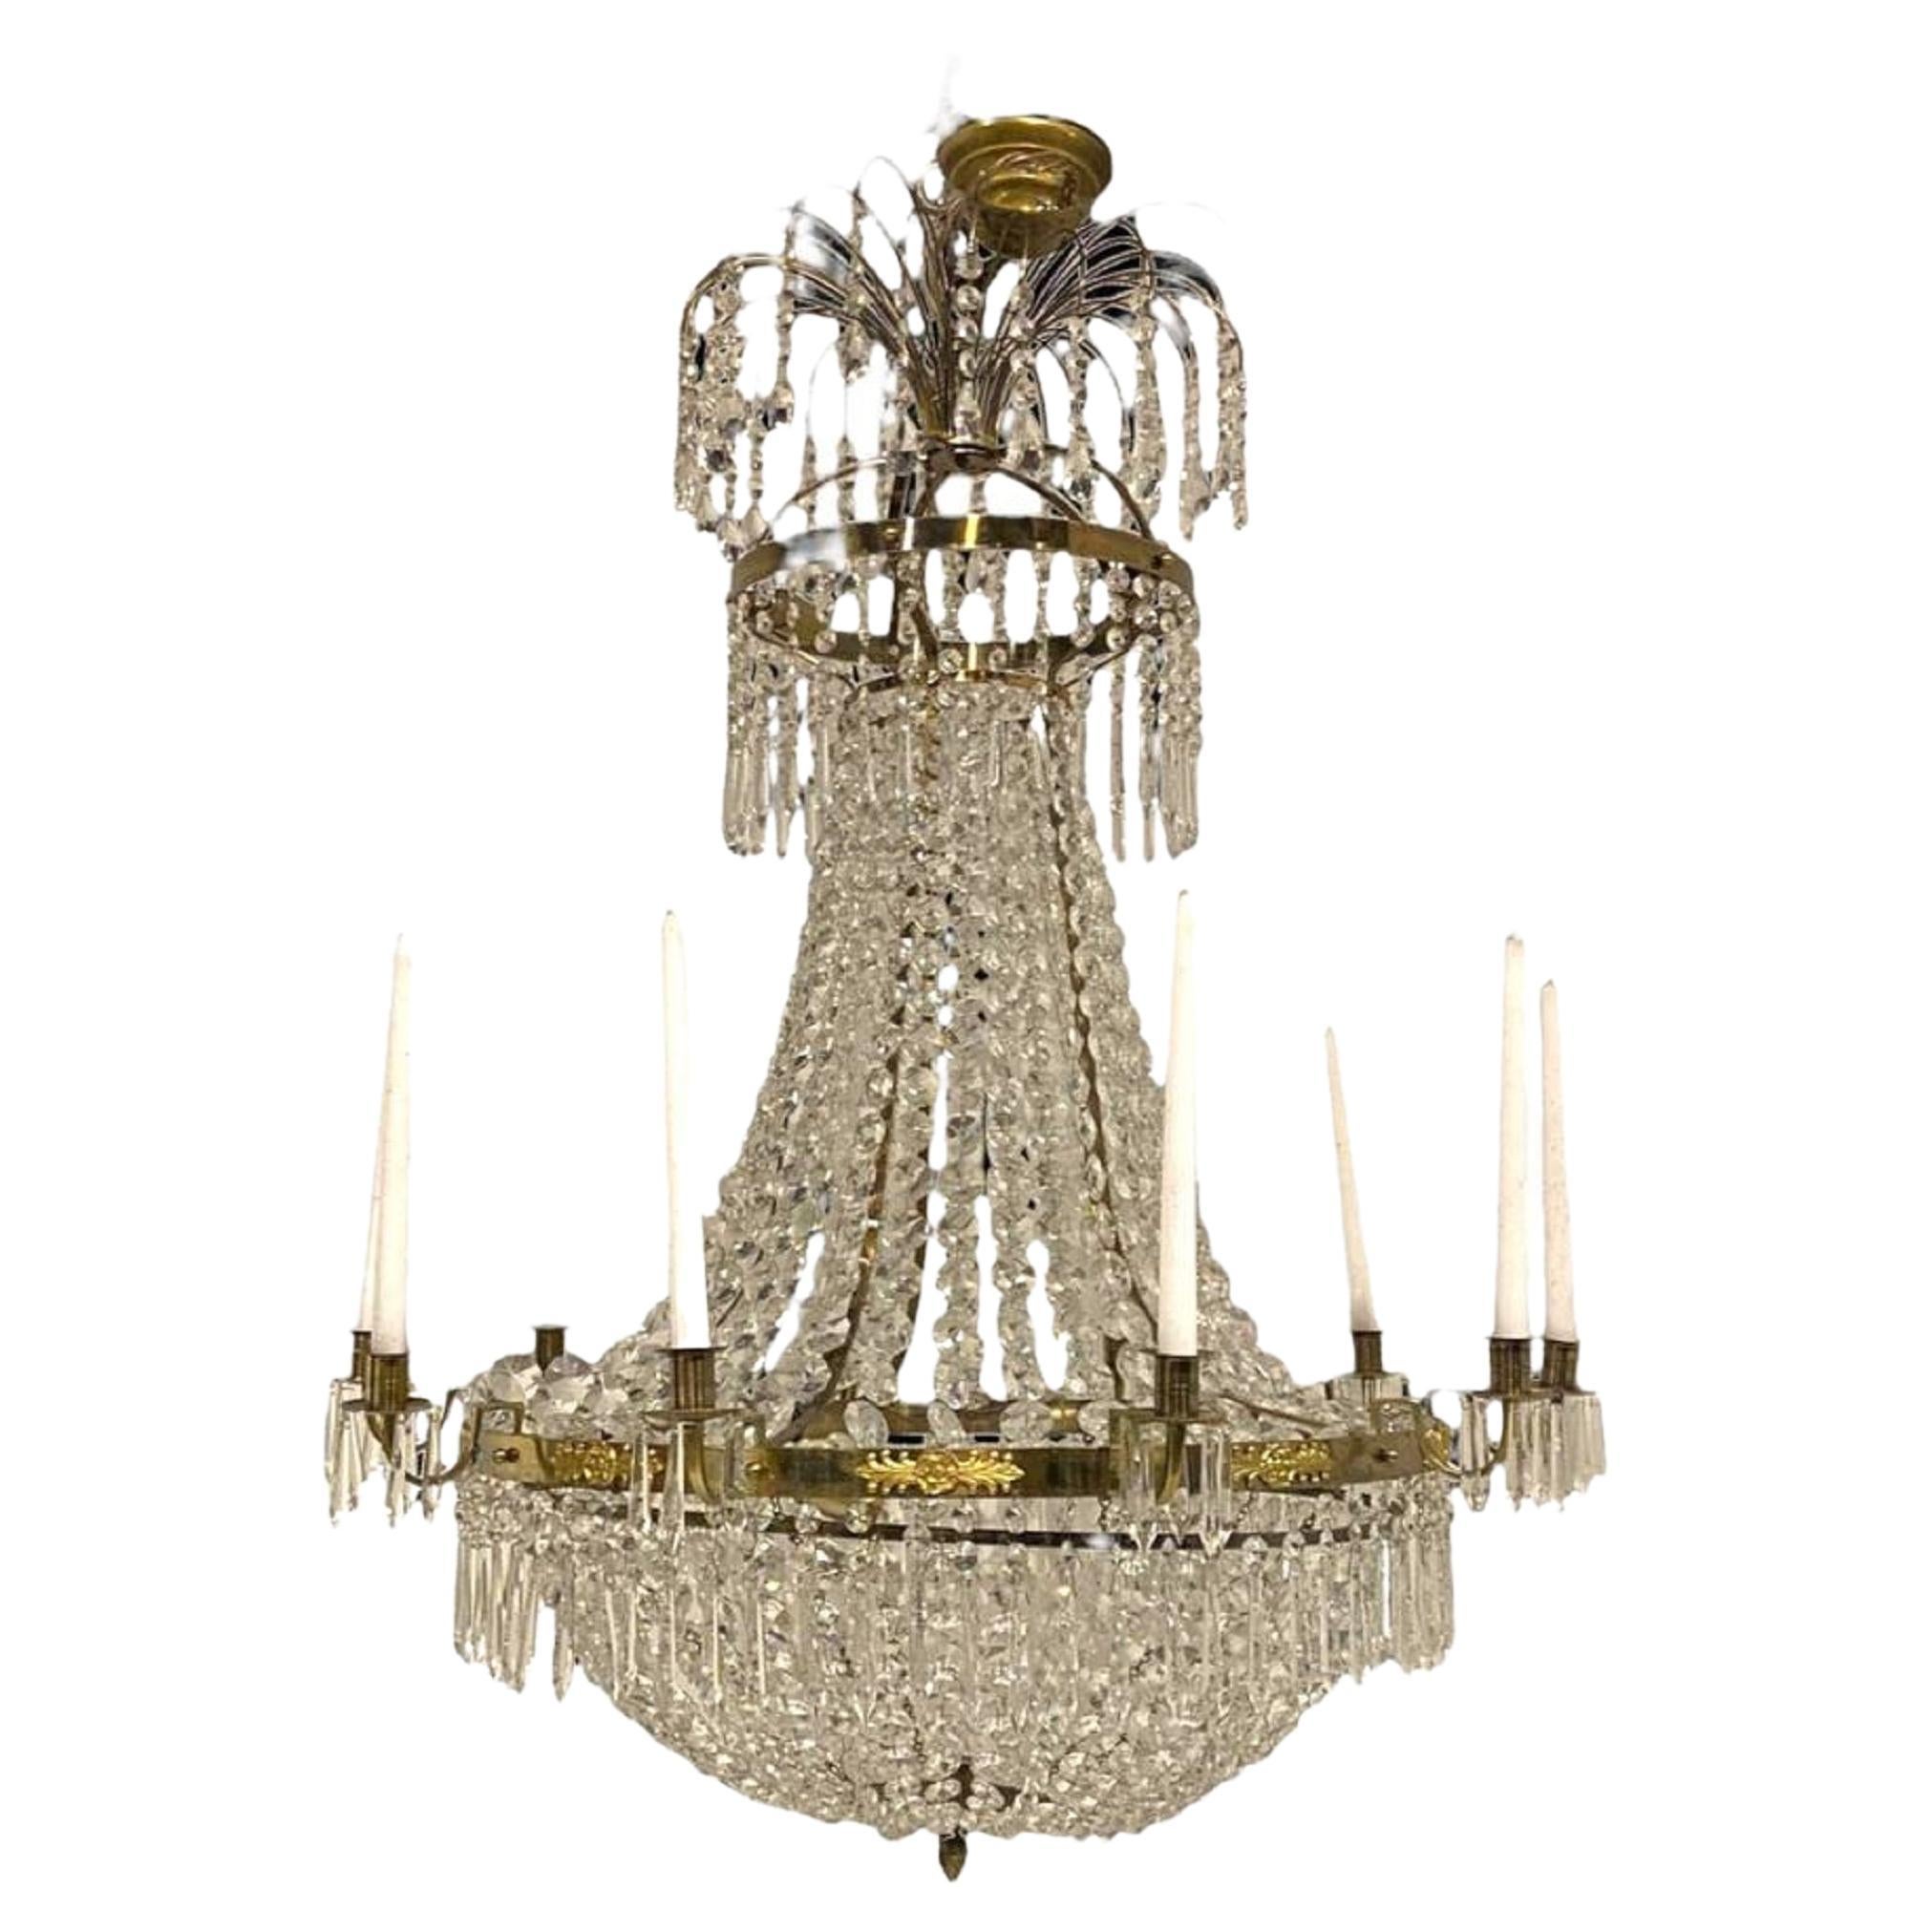 1900's Swedish Empire Crystal Chandelier with 12 lights